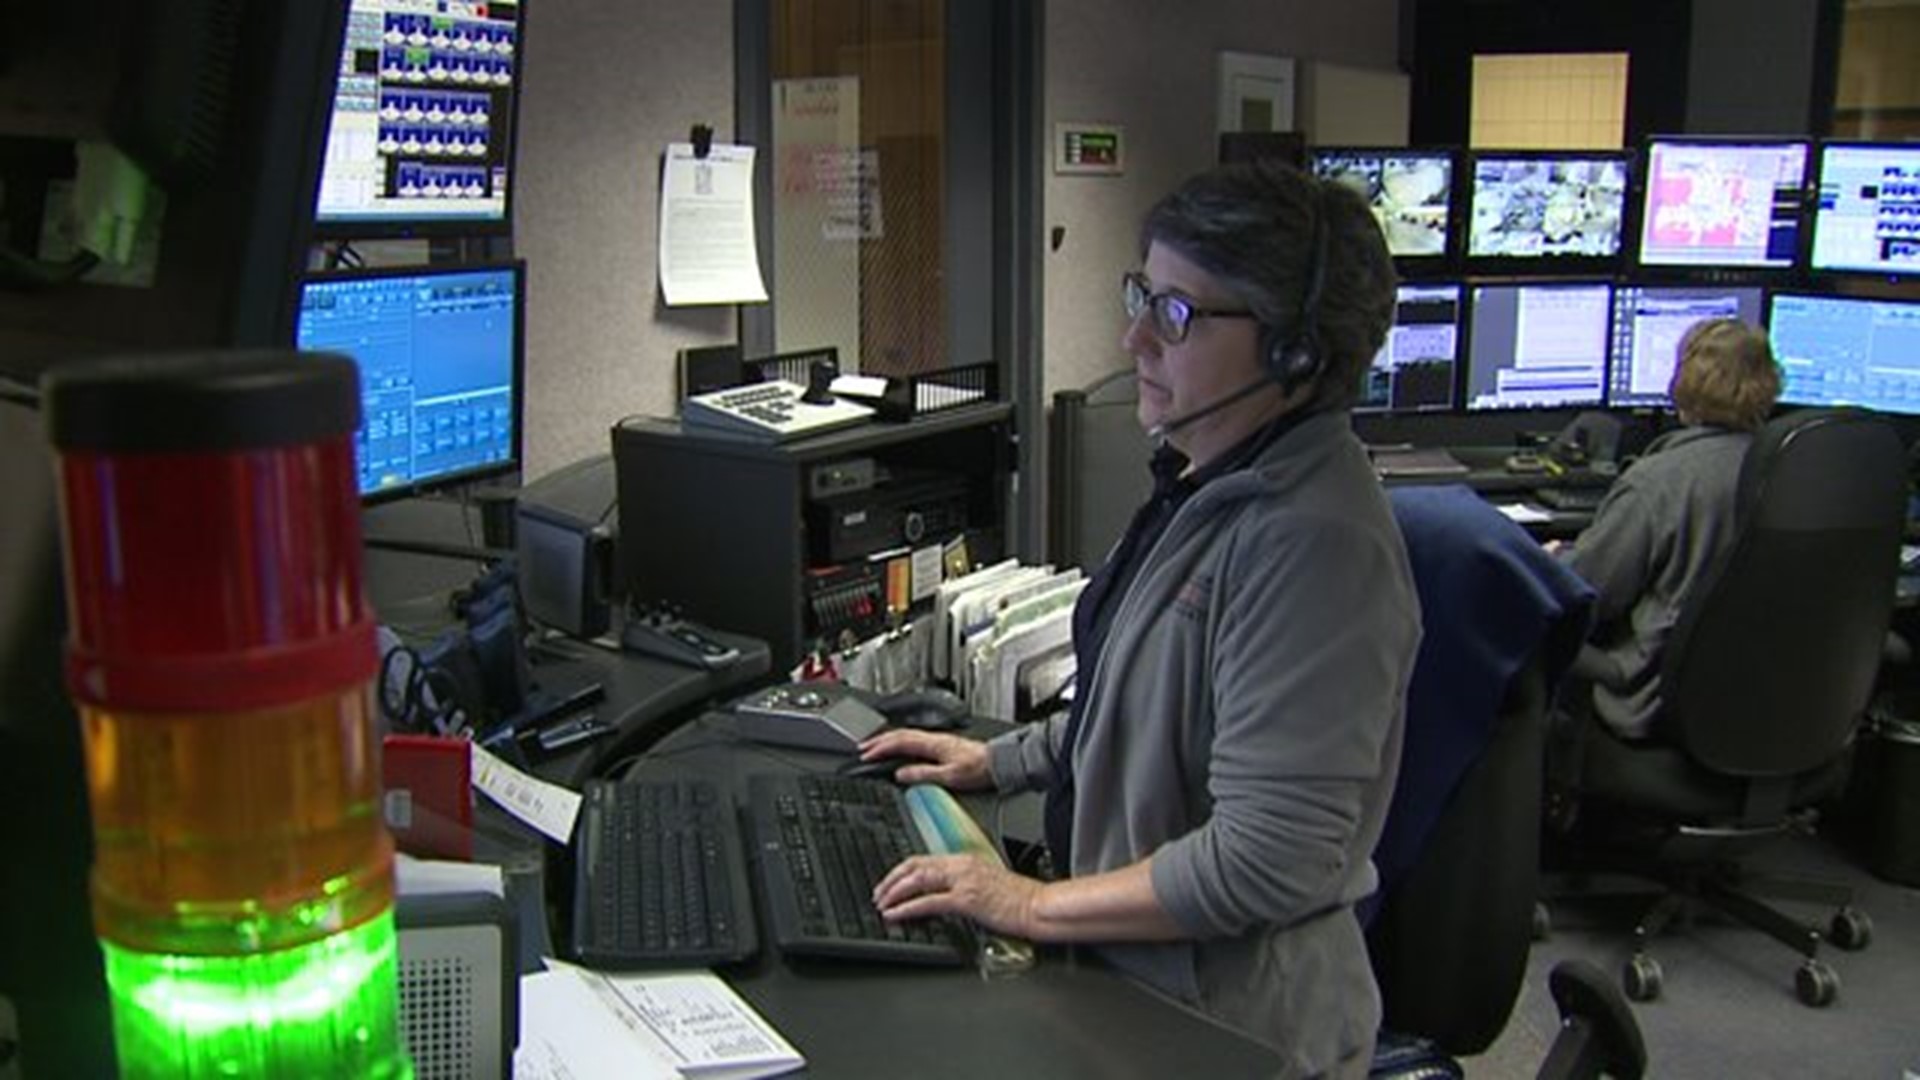 Knox County finalizing Smart 911 services